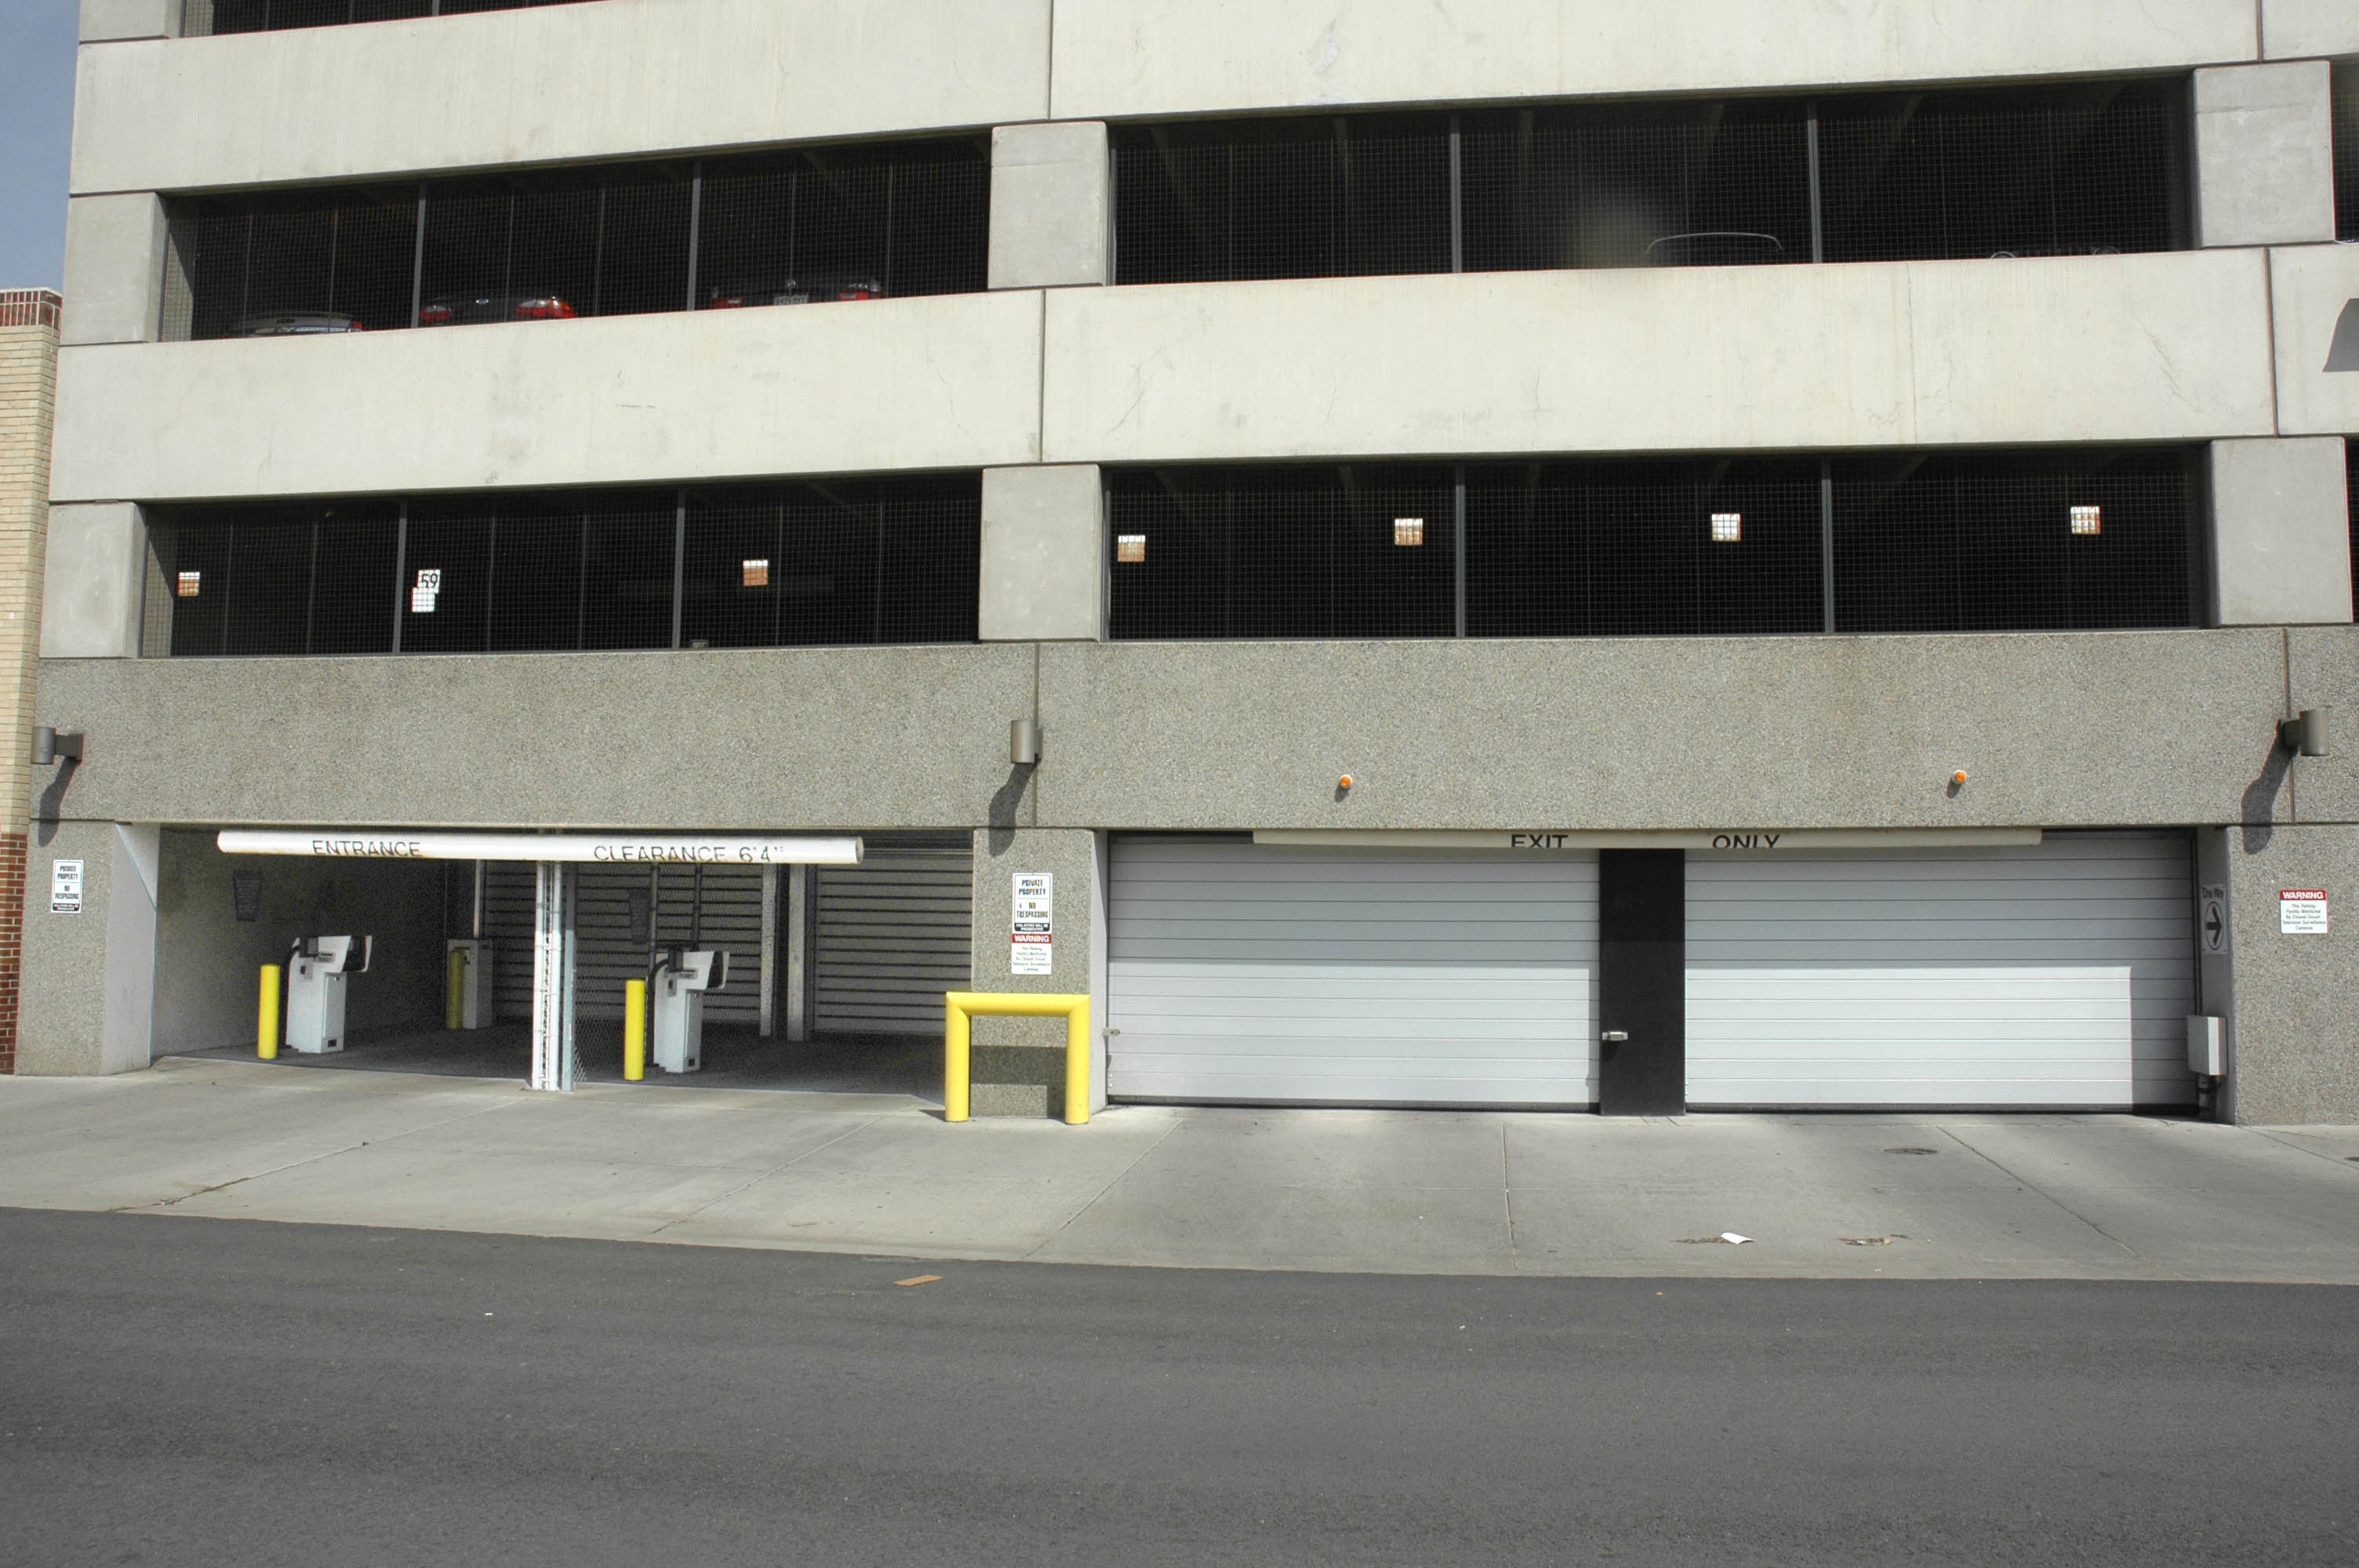 Inspect Your Parking Structure Doors Now – Before the Snow Flies